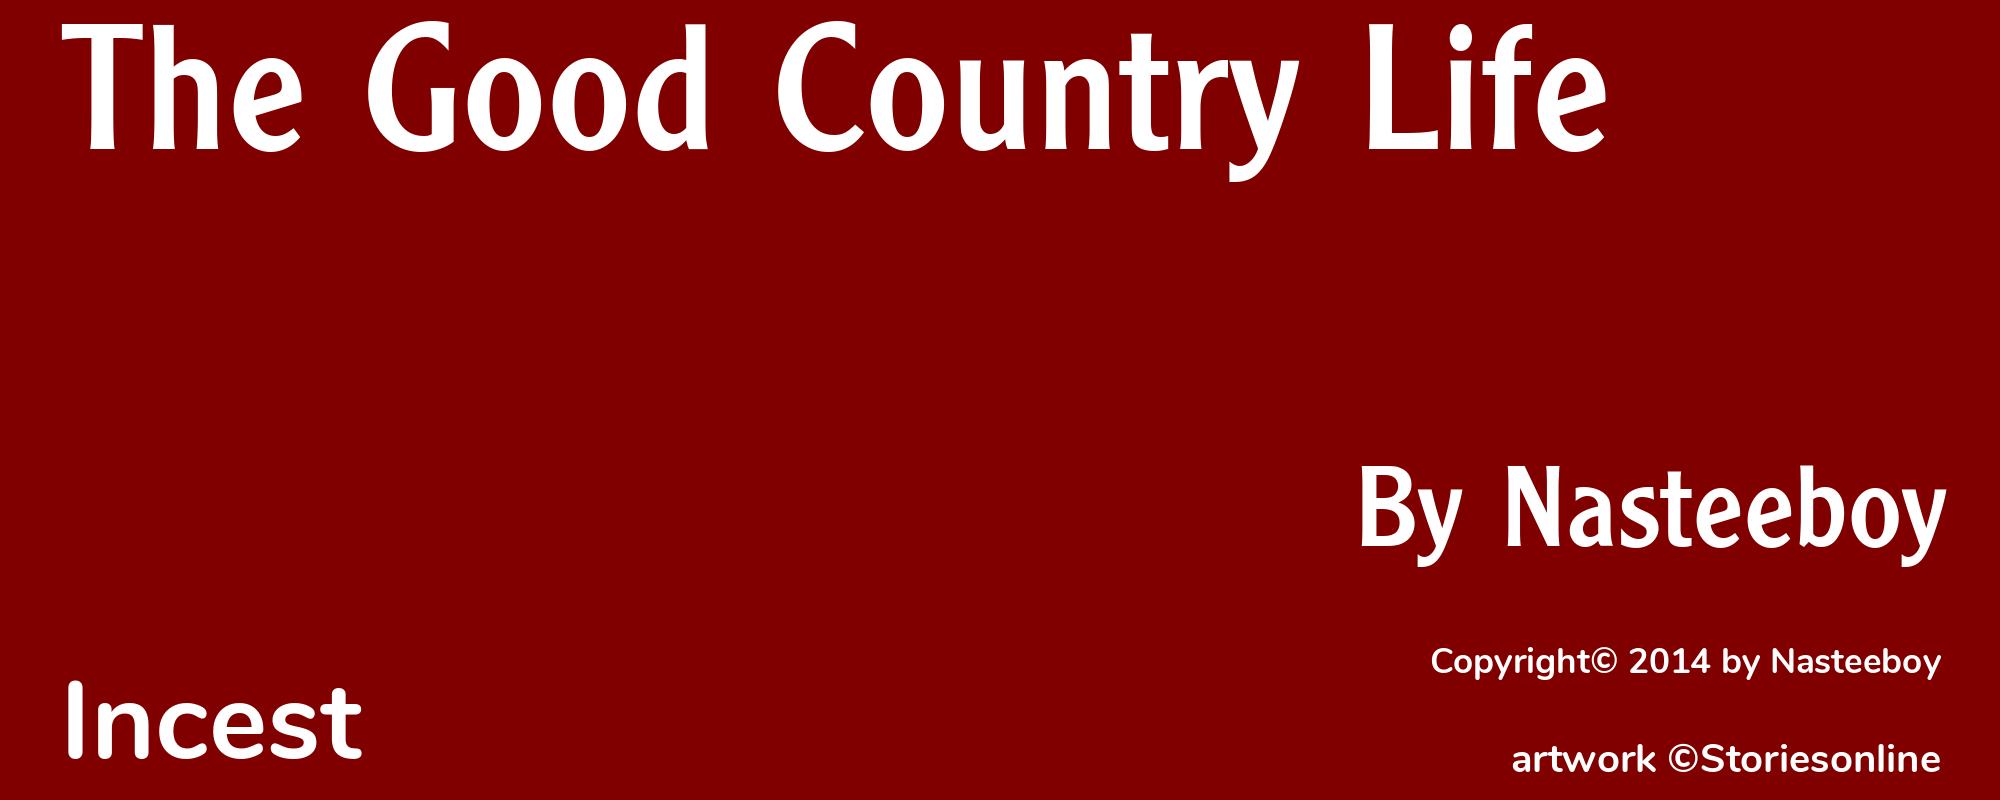 The Good Country Life - Cover